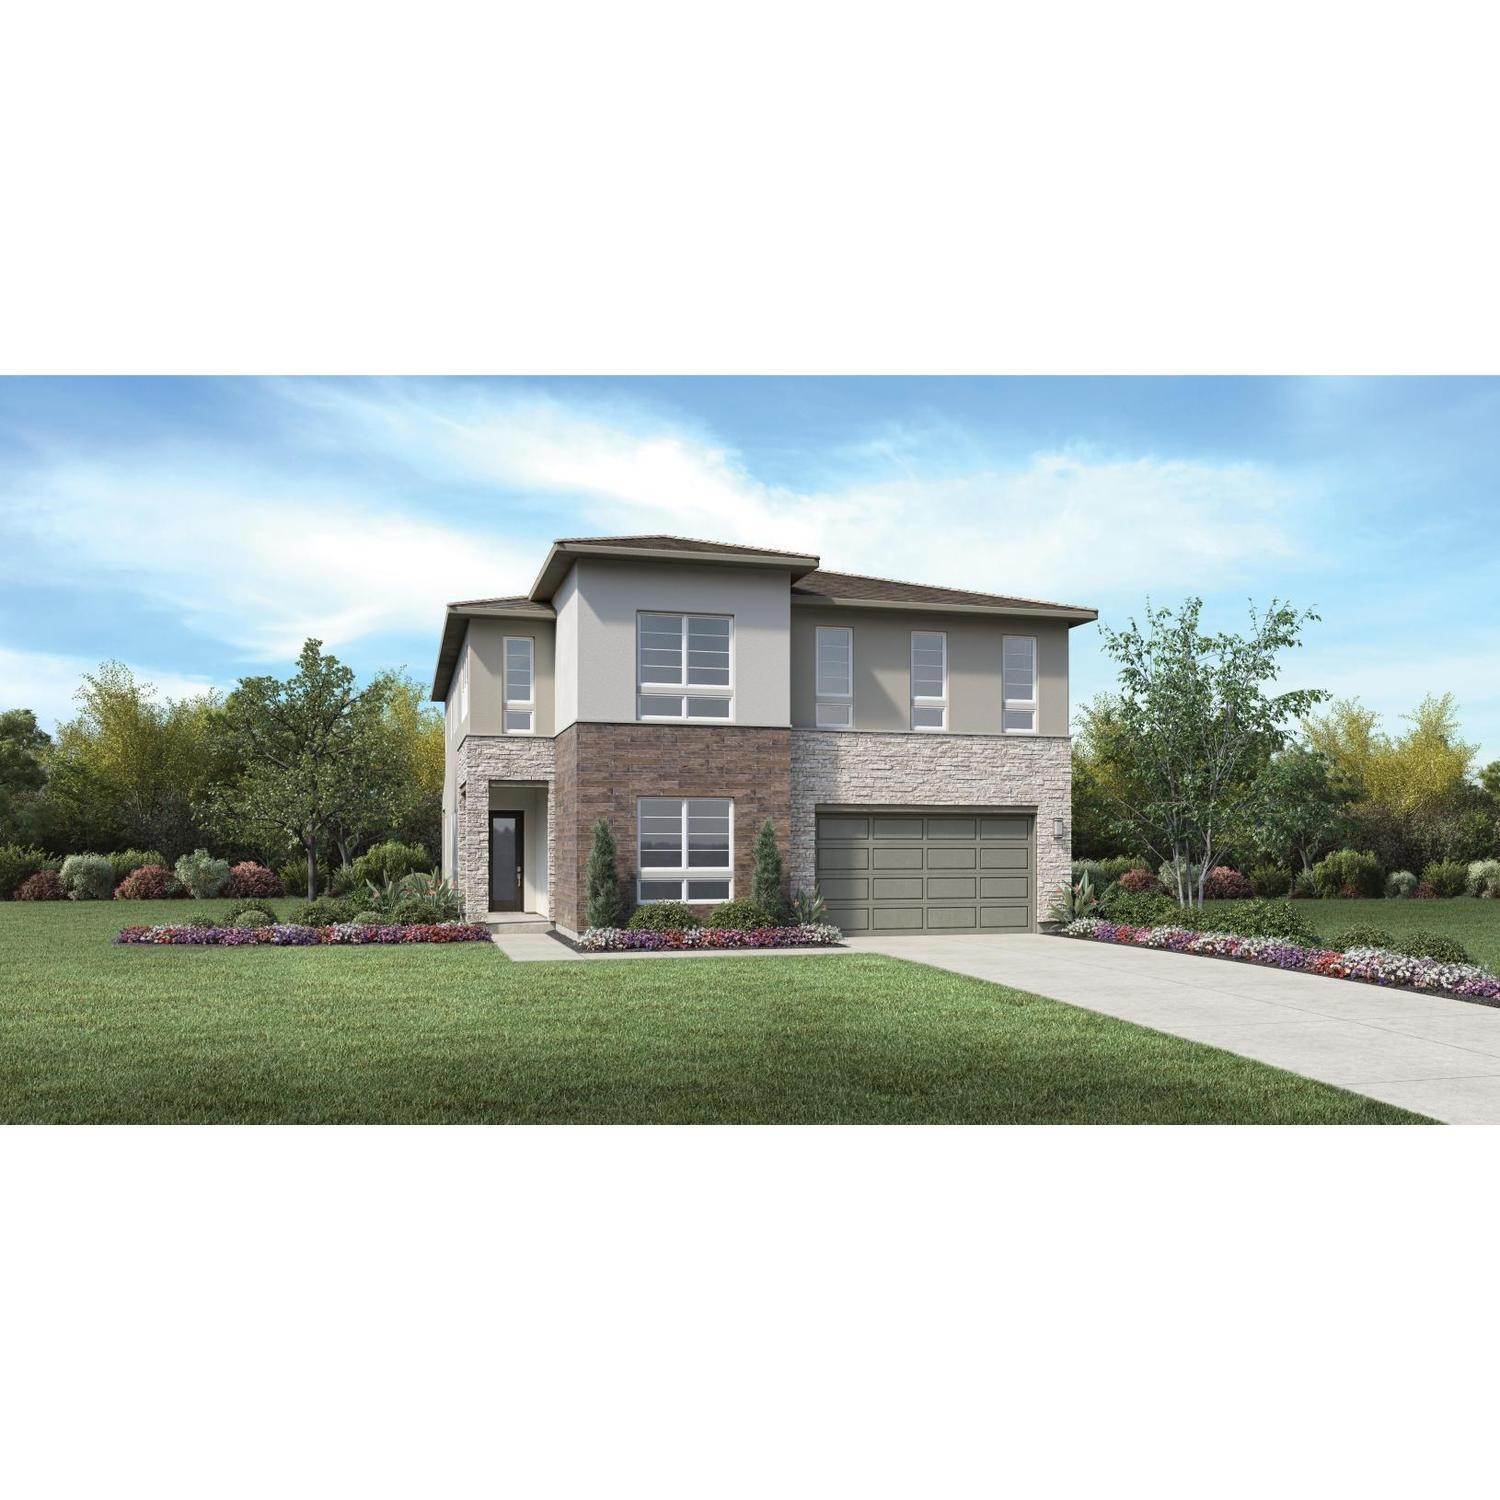 Single Family for Sale at Skylar By Toll Brothers - Sora 27783 Reel Ln VALENCIA, CALIFORNIA 91381 UNITED STATES